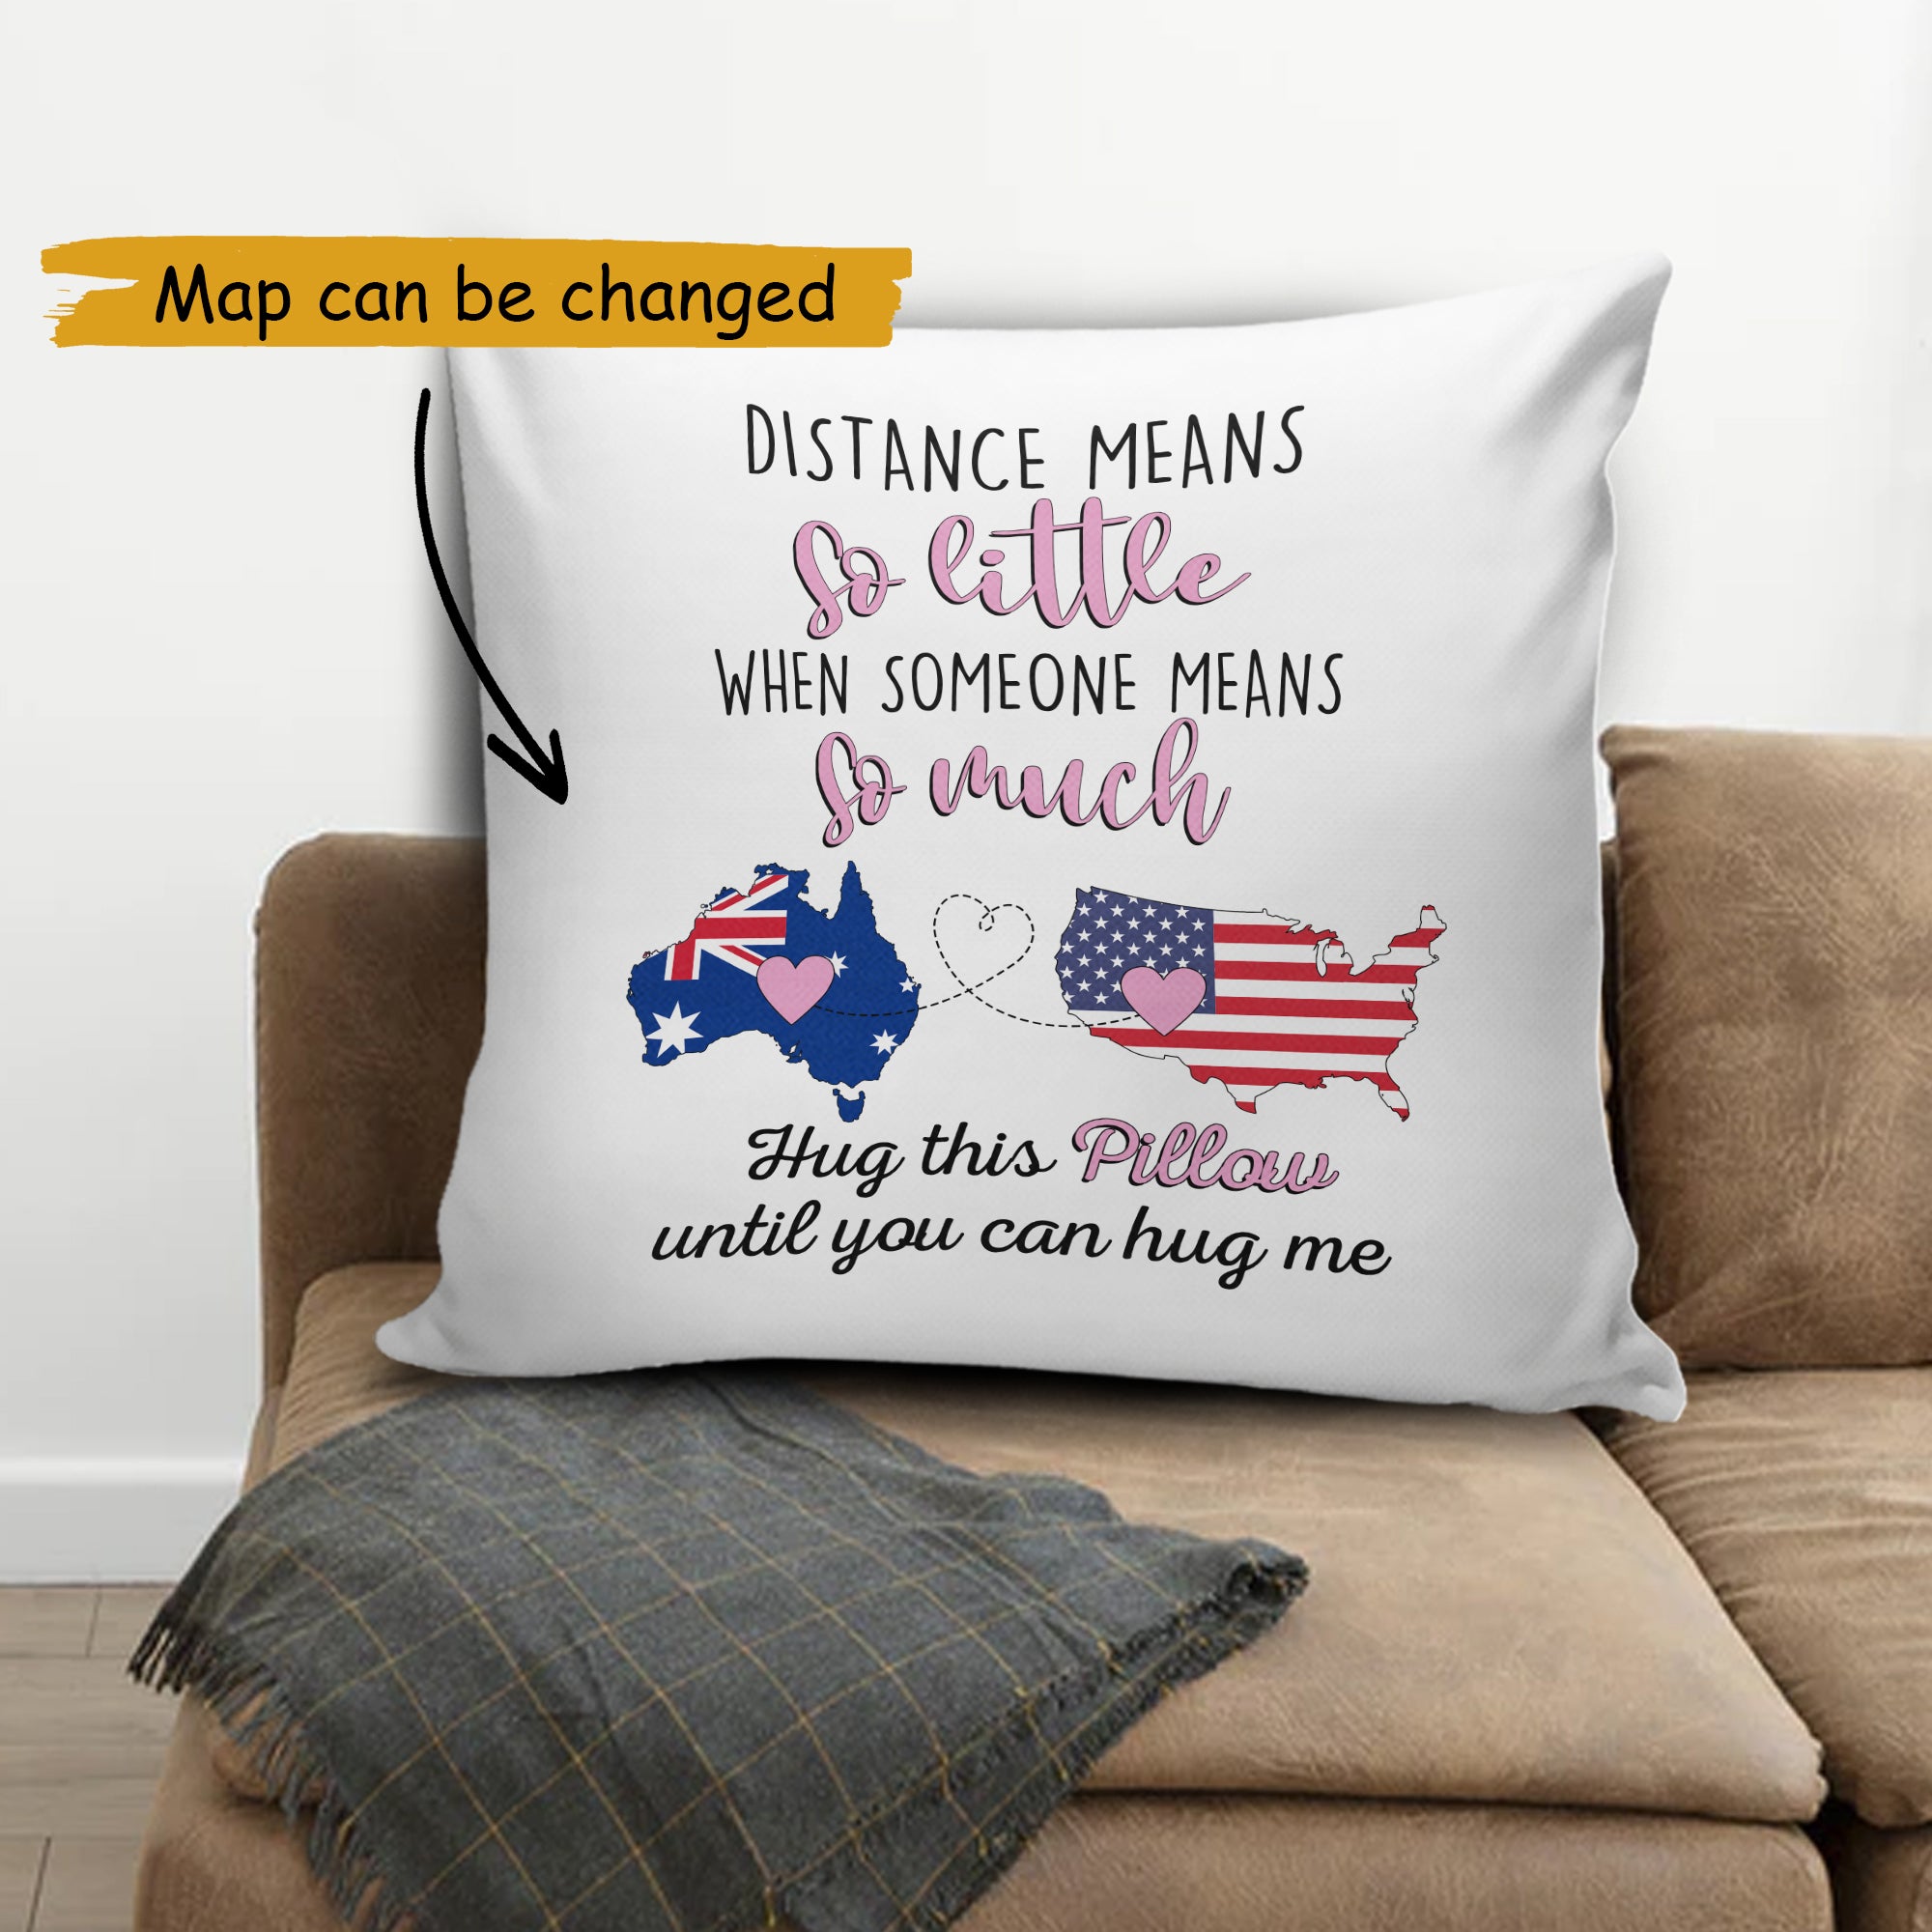 The pillow breaks all distances